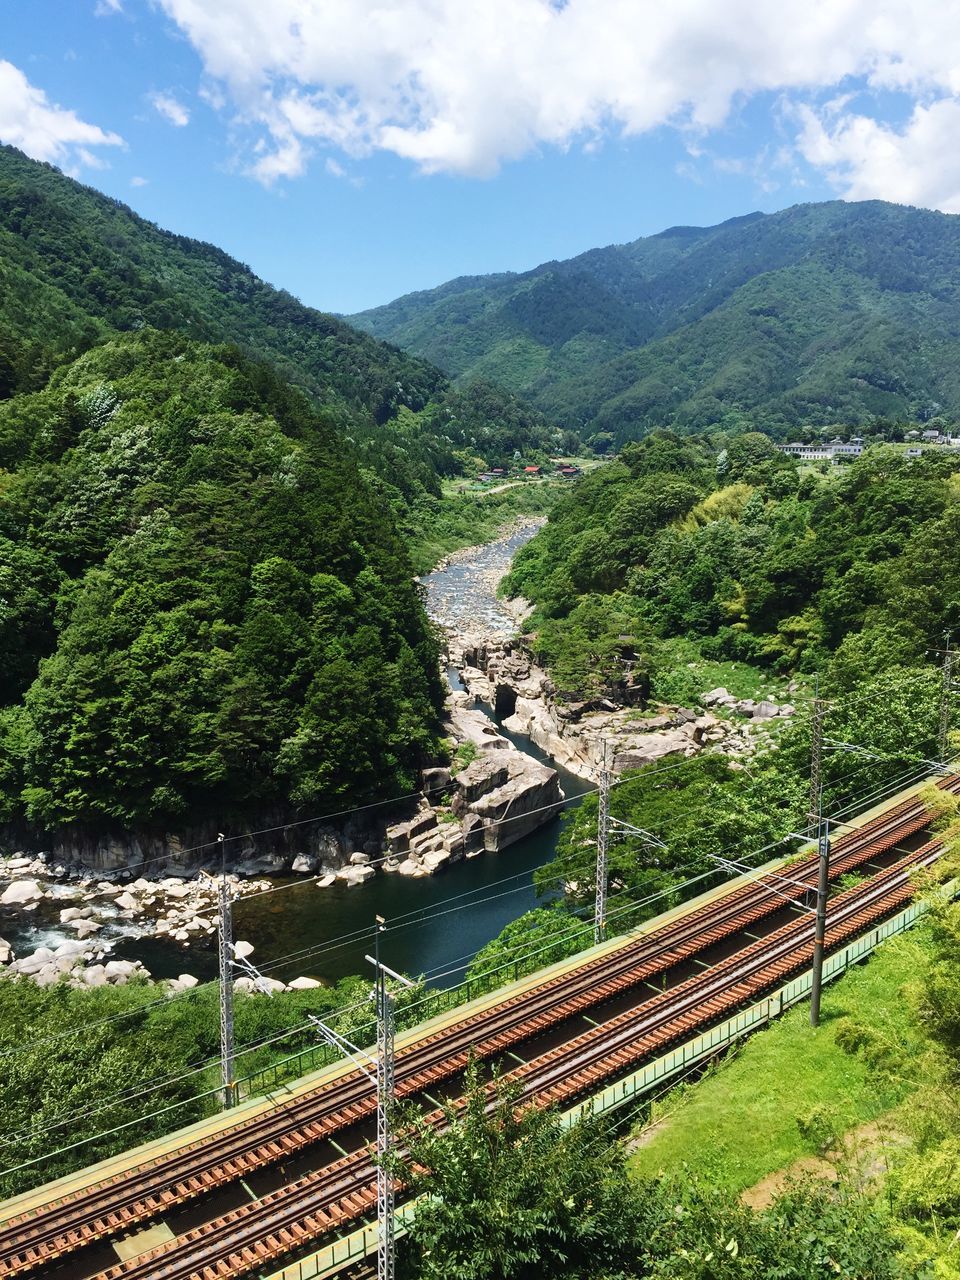 tree, plant, transportation, mountain, rail transportation, nature, sky, scenics - nature, beauty in nature, high angle view, cloud - sky, connection, no people, architecture, railroad track, bridge, day, built structure, green color, track, bridge - man made structure, mountain range, outdoors